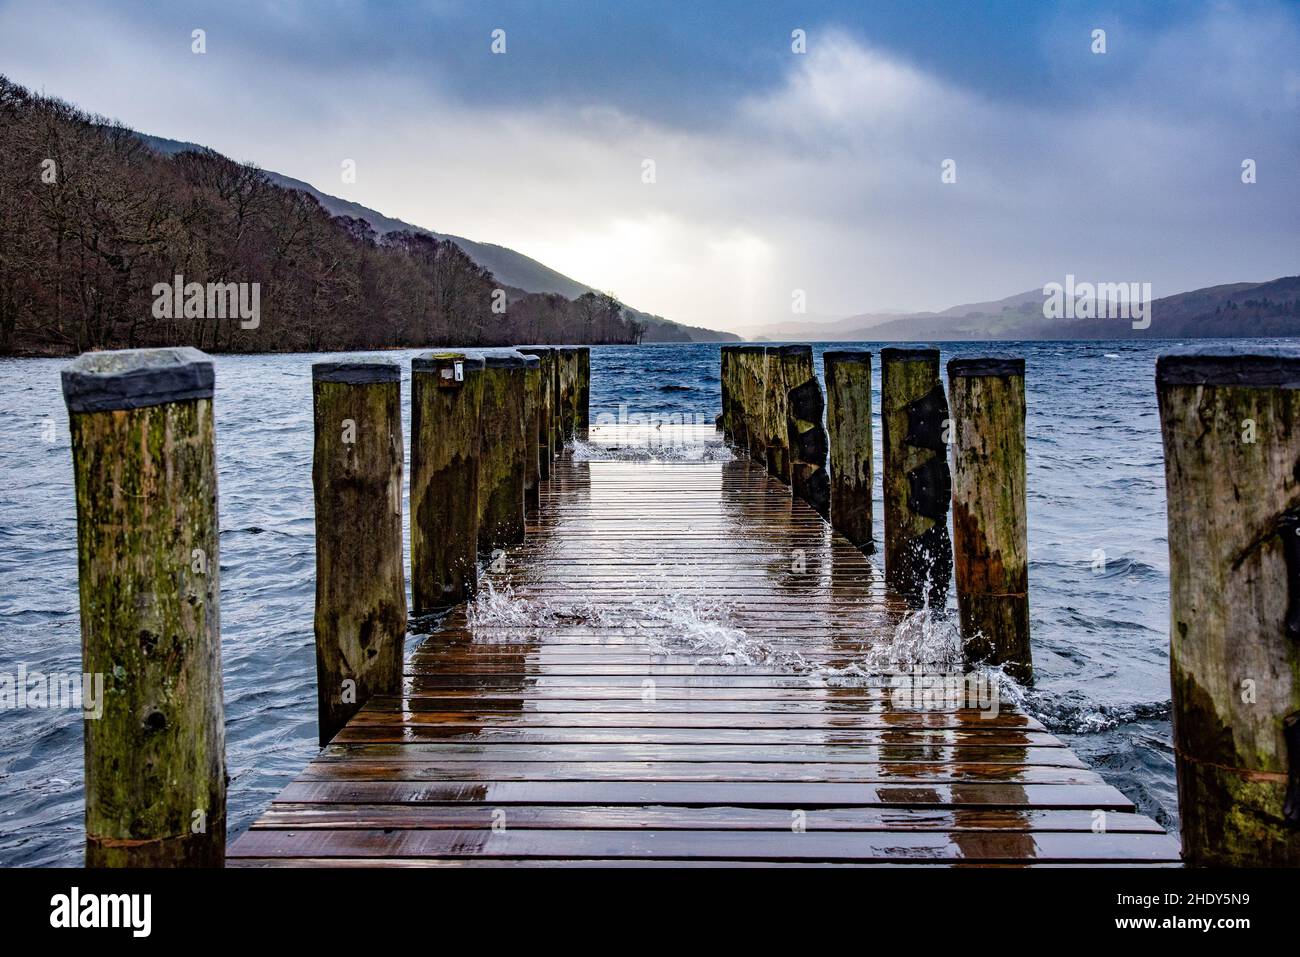 Ferry jetty at Brantwood on Lake Coniston, Cumbria, UK Stock Photo